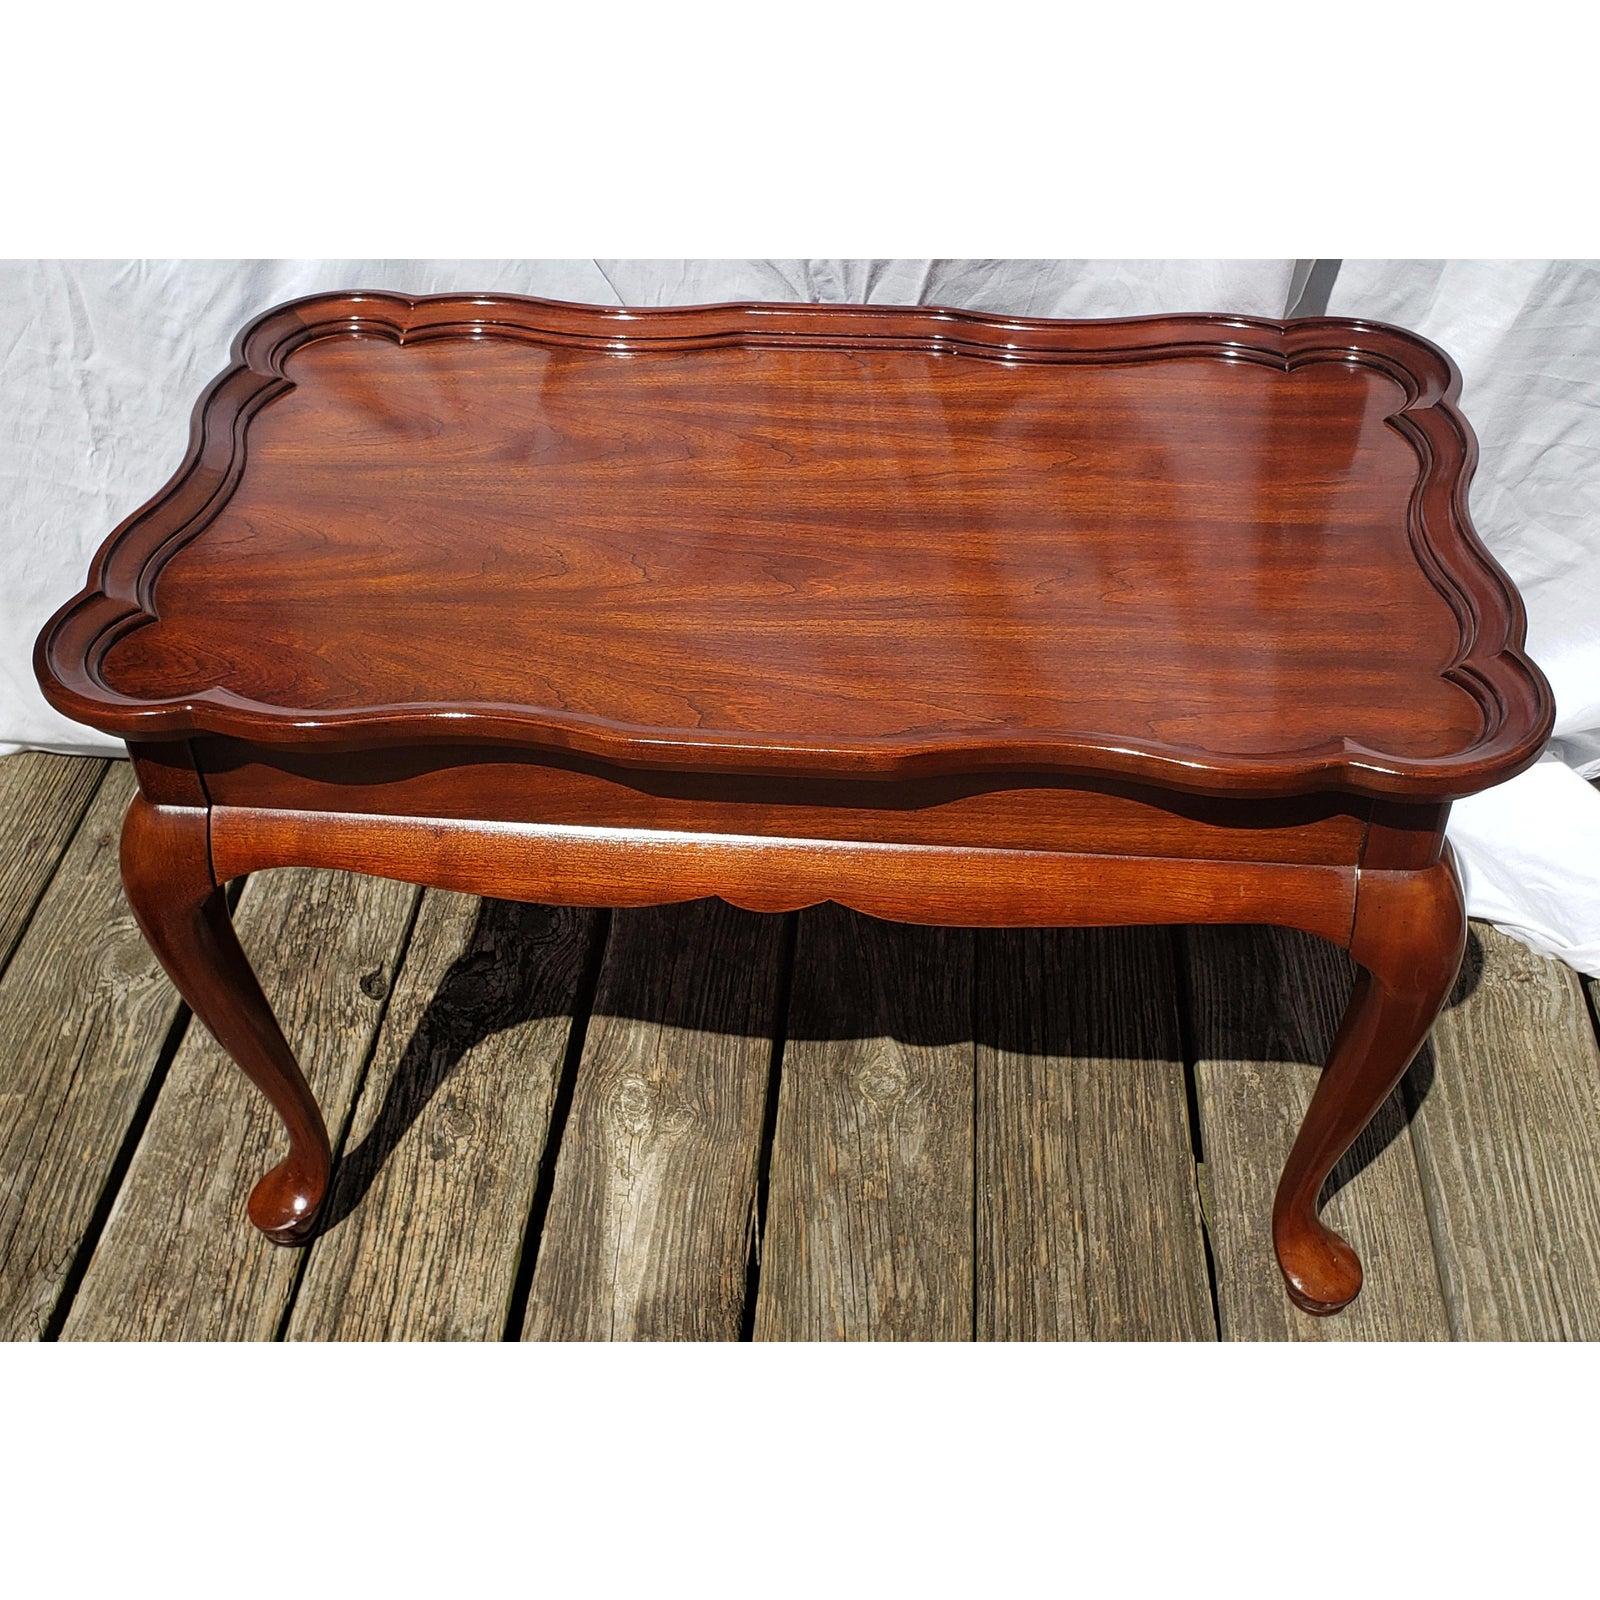 North American 1960s Superior Furniture Solid Walnut Scallop Edge Tea Table with Pull Out Tray For Sale